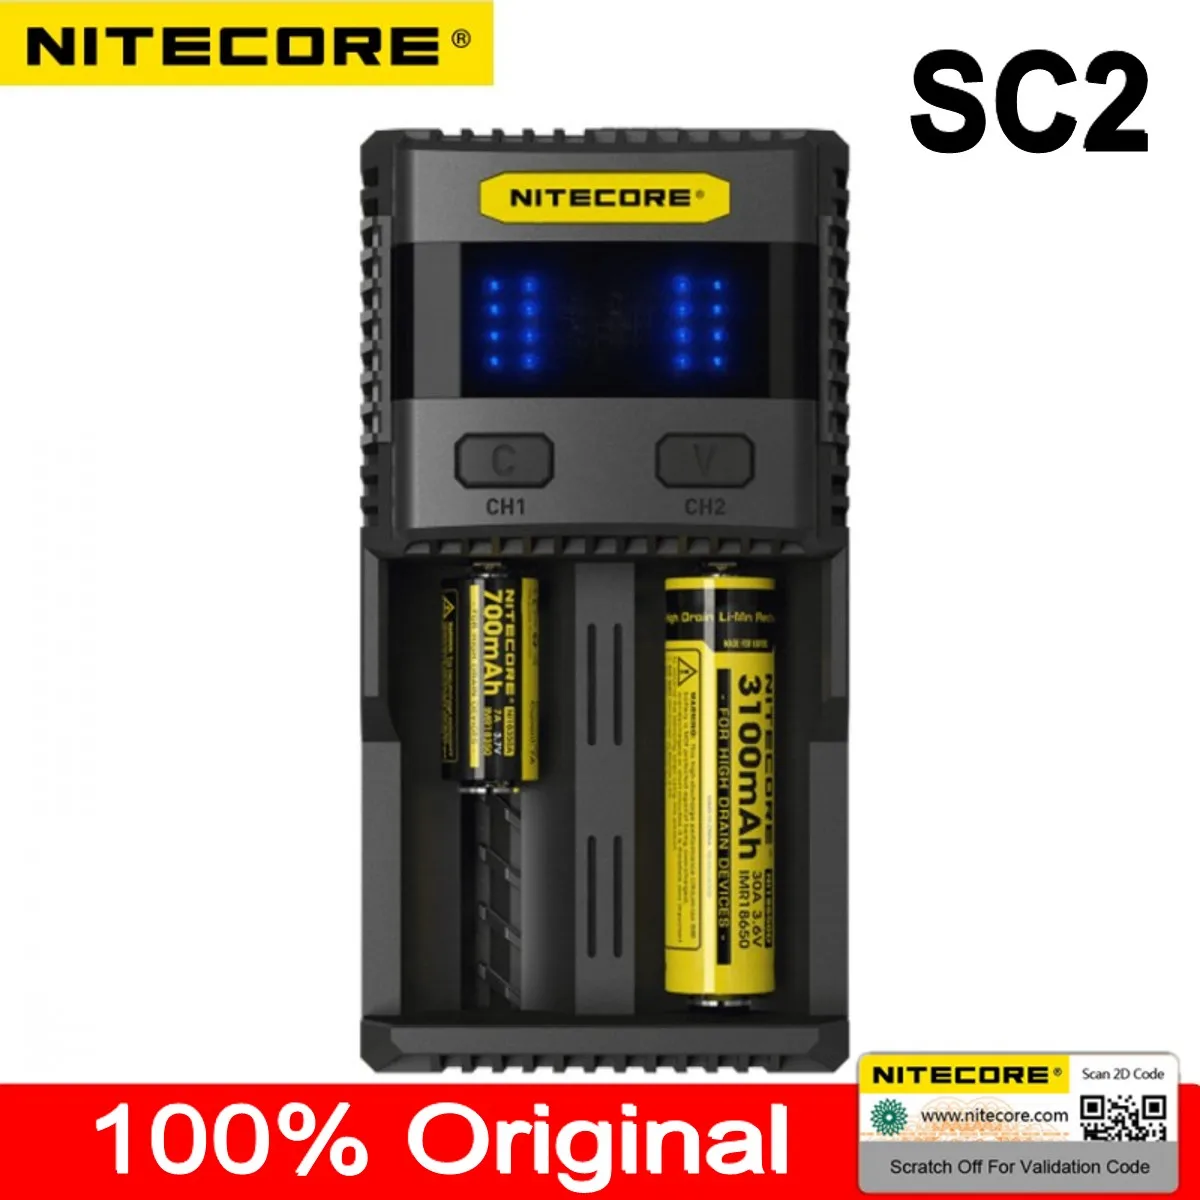 

Nitecore SC2 Charger Intelligent Battery Charger USB Max Output 2.1A for LiFePO4 Lithium Ion Ni-MH NiCd 10340 10350 10440 10500